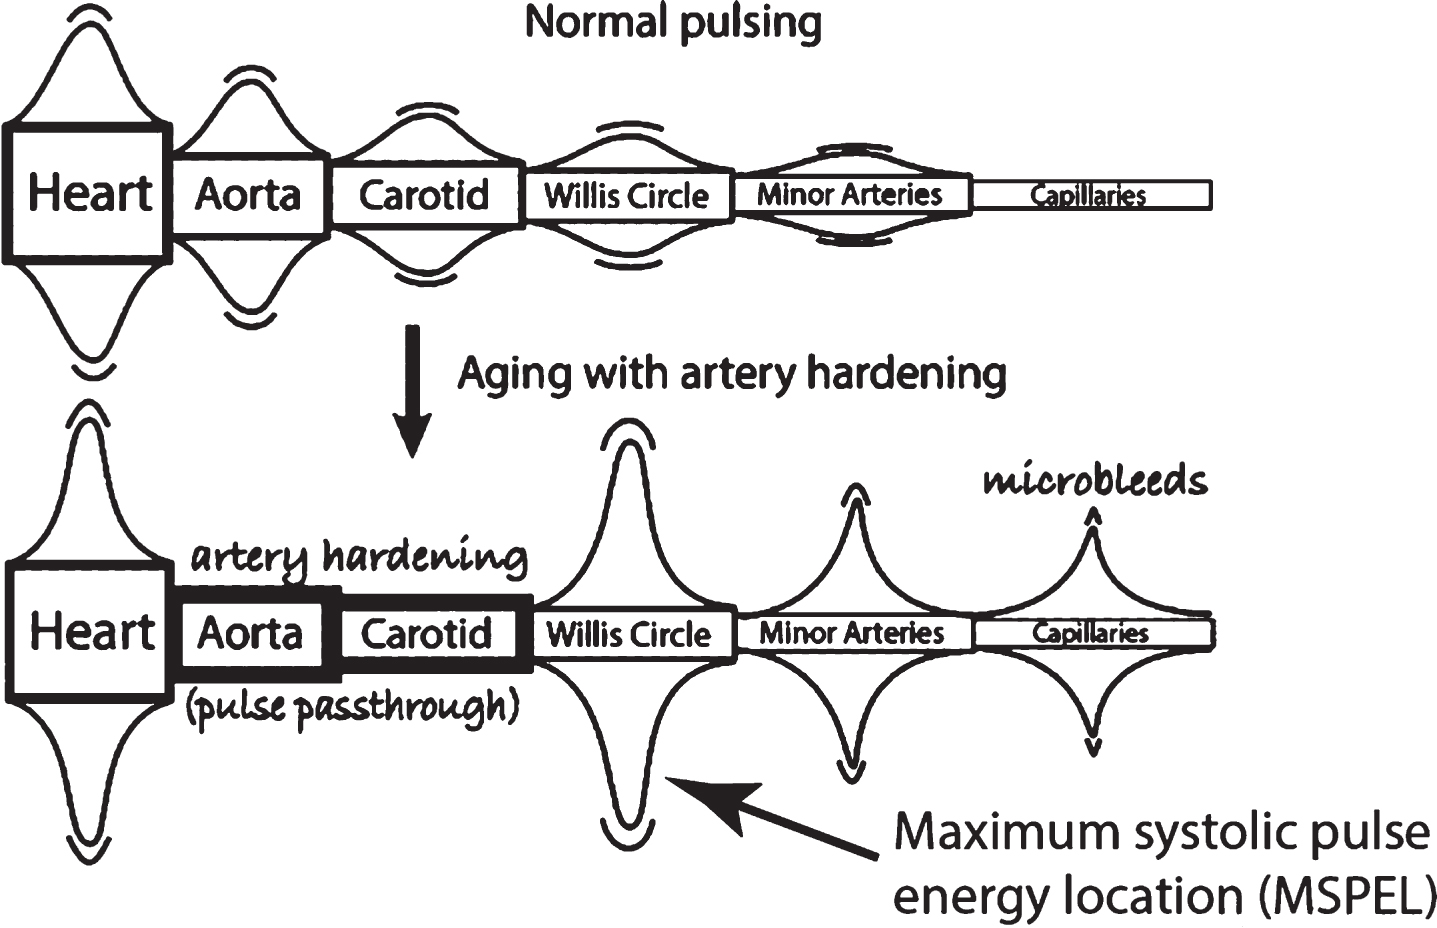 Steady migration of Maximum Systolic Pulse Energy Location (MSPEL) for blood and CSF with age through the brain extending further from the heart with artery hardening. A similar diagram exists with “Basilar” substituted for “Carotid.” With permission [5].